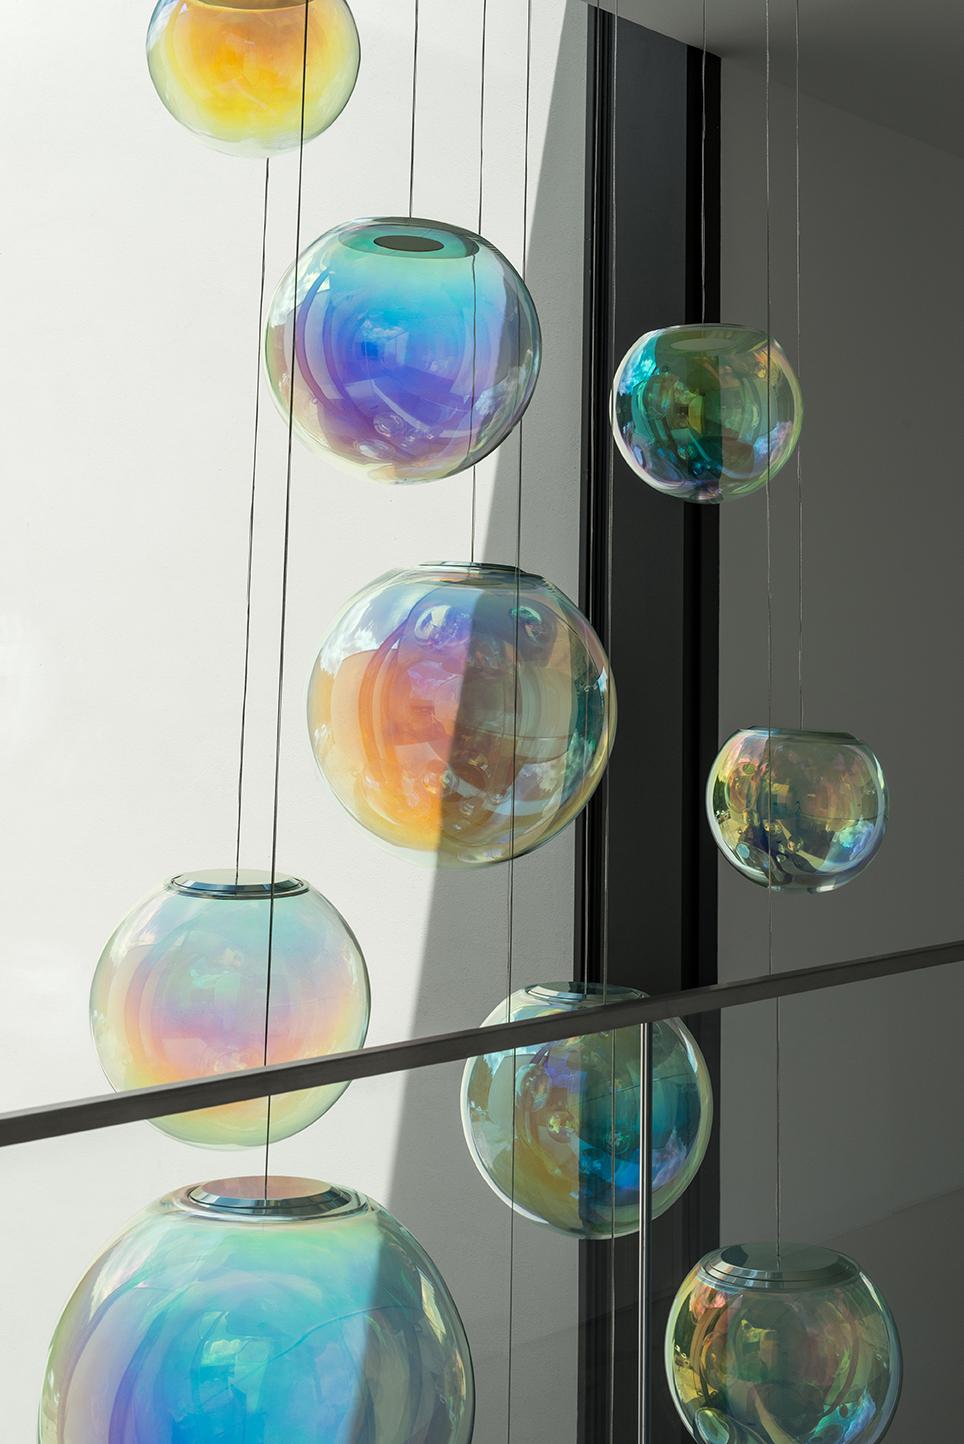 Iris Globe 30
glass color (transmission-reflection): cyan-magenta
metal color: stainless steel (silver)
- cable color: steel
- material: crystal glass, stainless steel
- ø 30 cm, weight: 2,8 kg 
- cable length max. 4 m (adjustable), ø 2mm
- ceiling